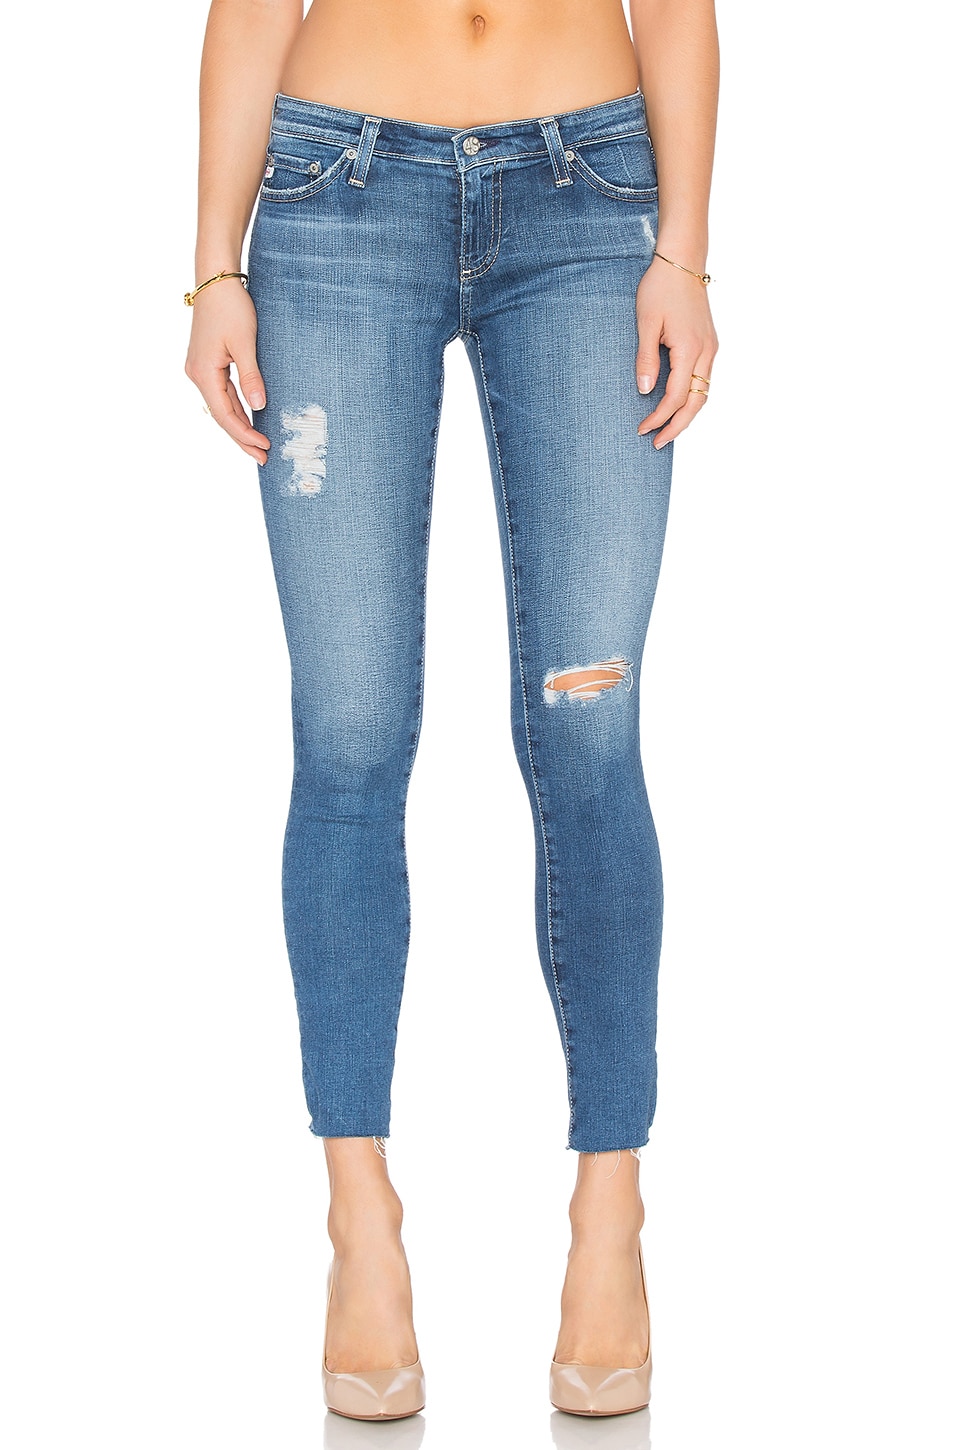 ag legging ankle jeans 18 year